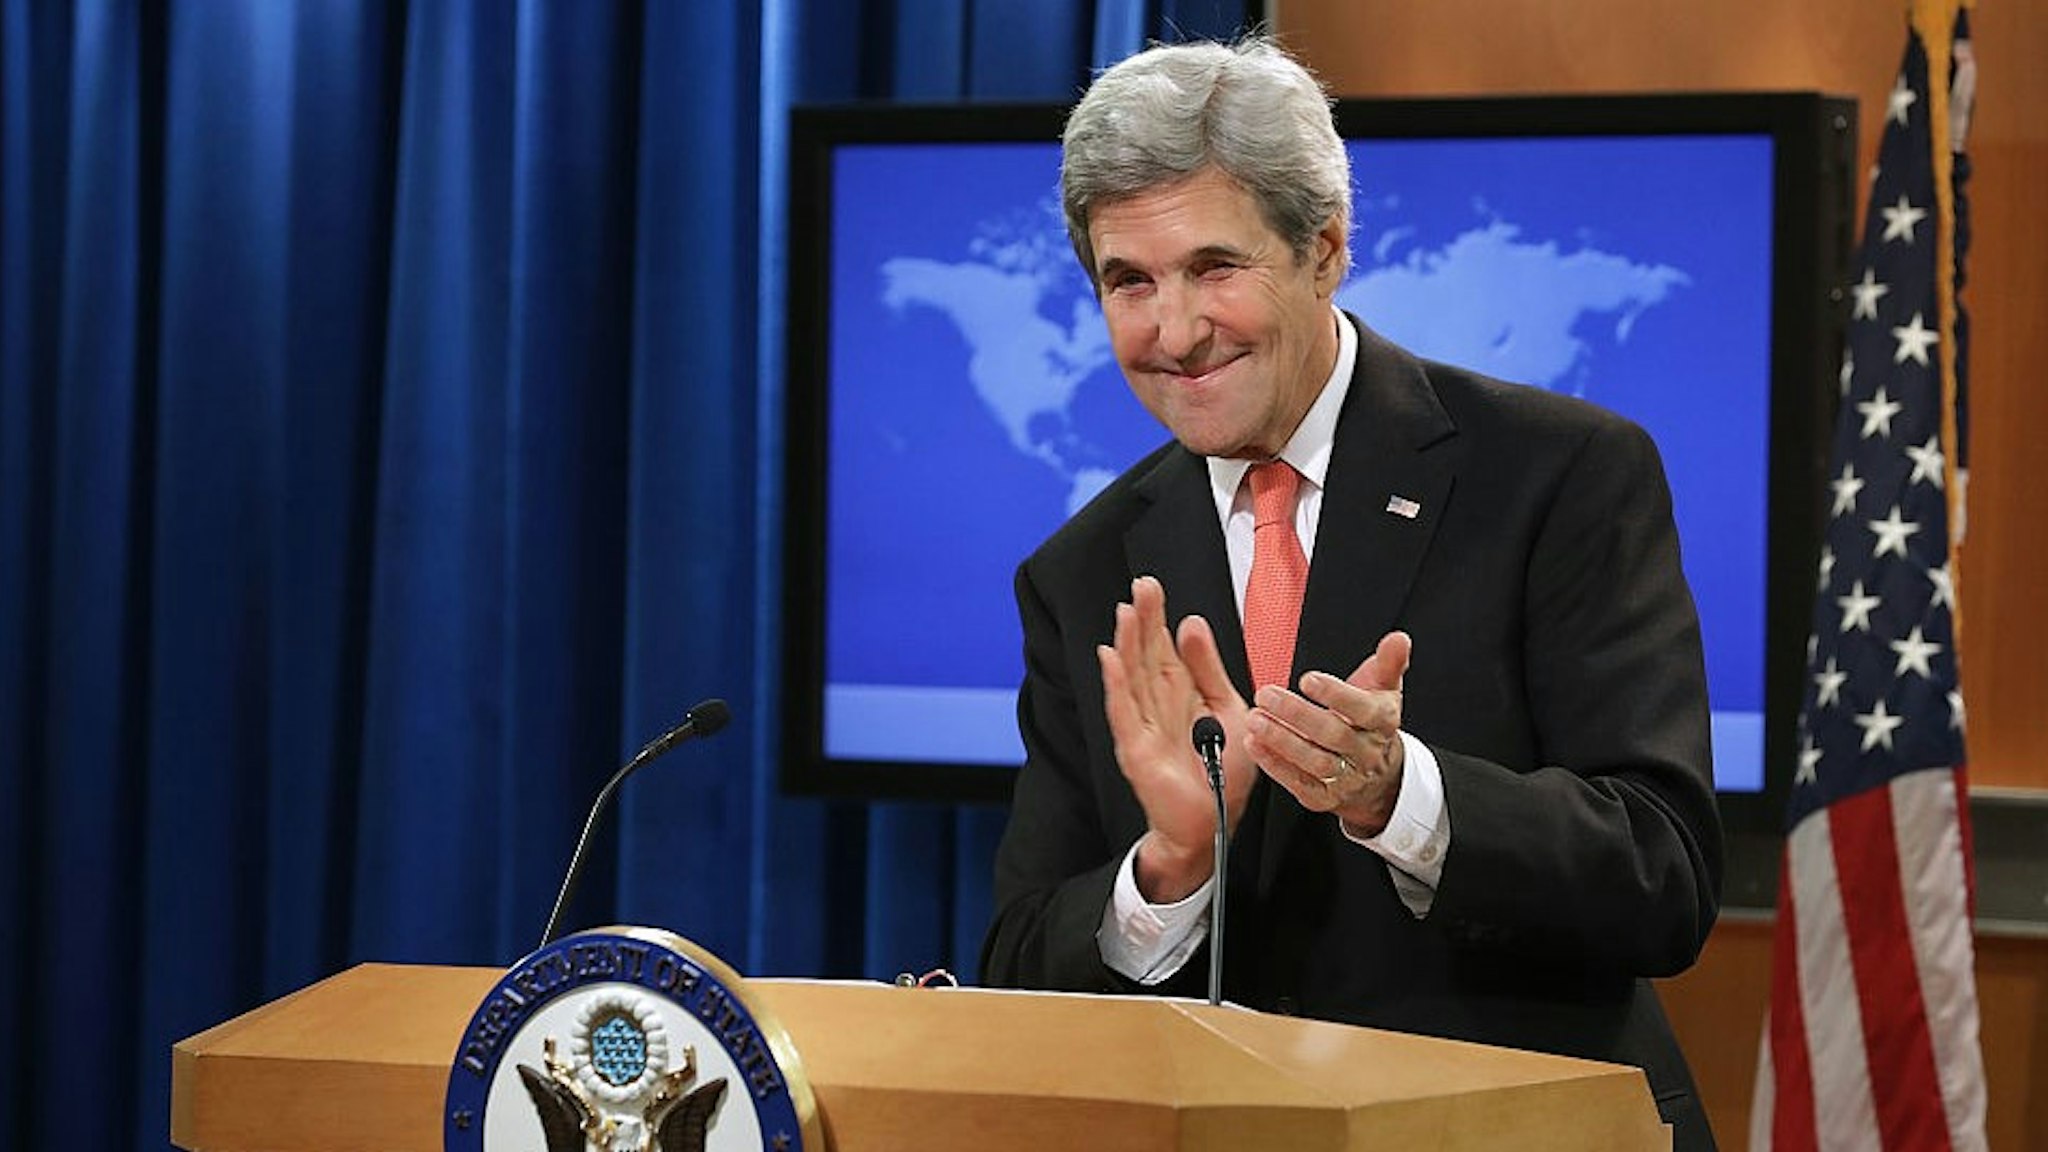 WASHINGTON, DC - JANUARY 05: U.S. Secretary of State John Kerry holds a news conference at the State Department headquarters at the Harry S. Truman building January 5, 2017 in Washington, DC. Kerry used the news conference to list what he considers his and President Barack Obama's foreign policy accomplishments as he prepares to hand the reigns of the department over to the Donald Trump administration. (Photo by